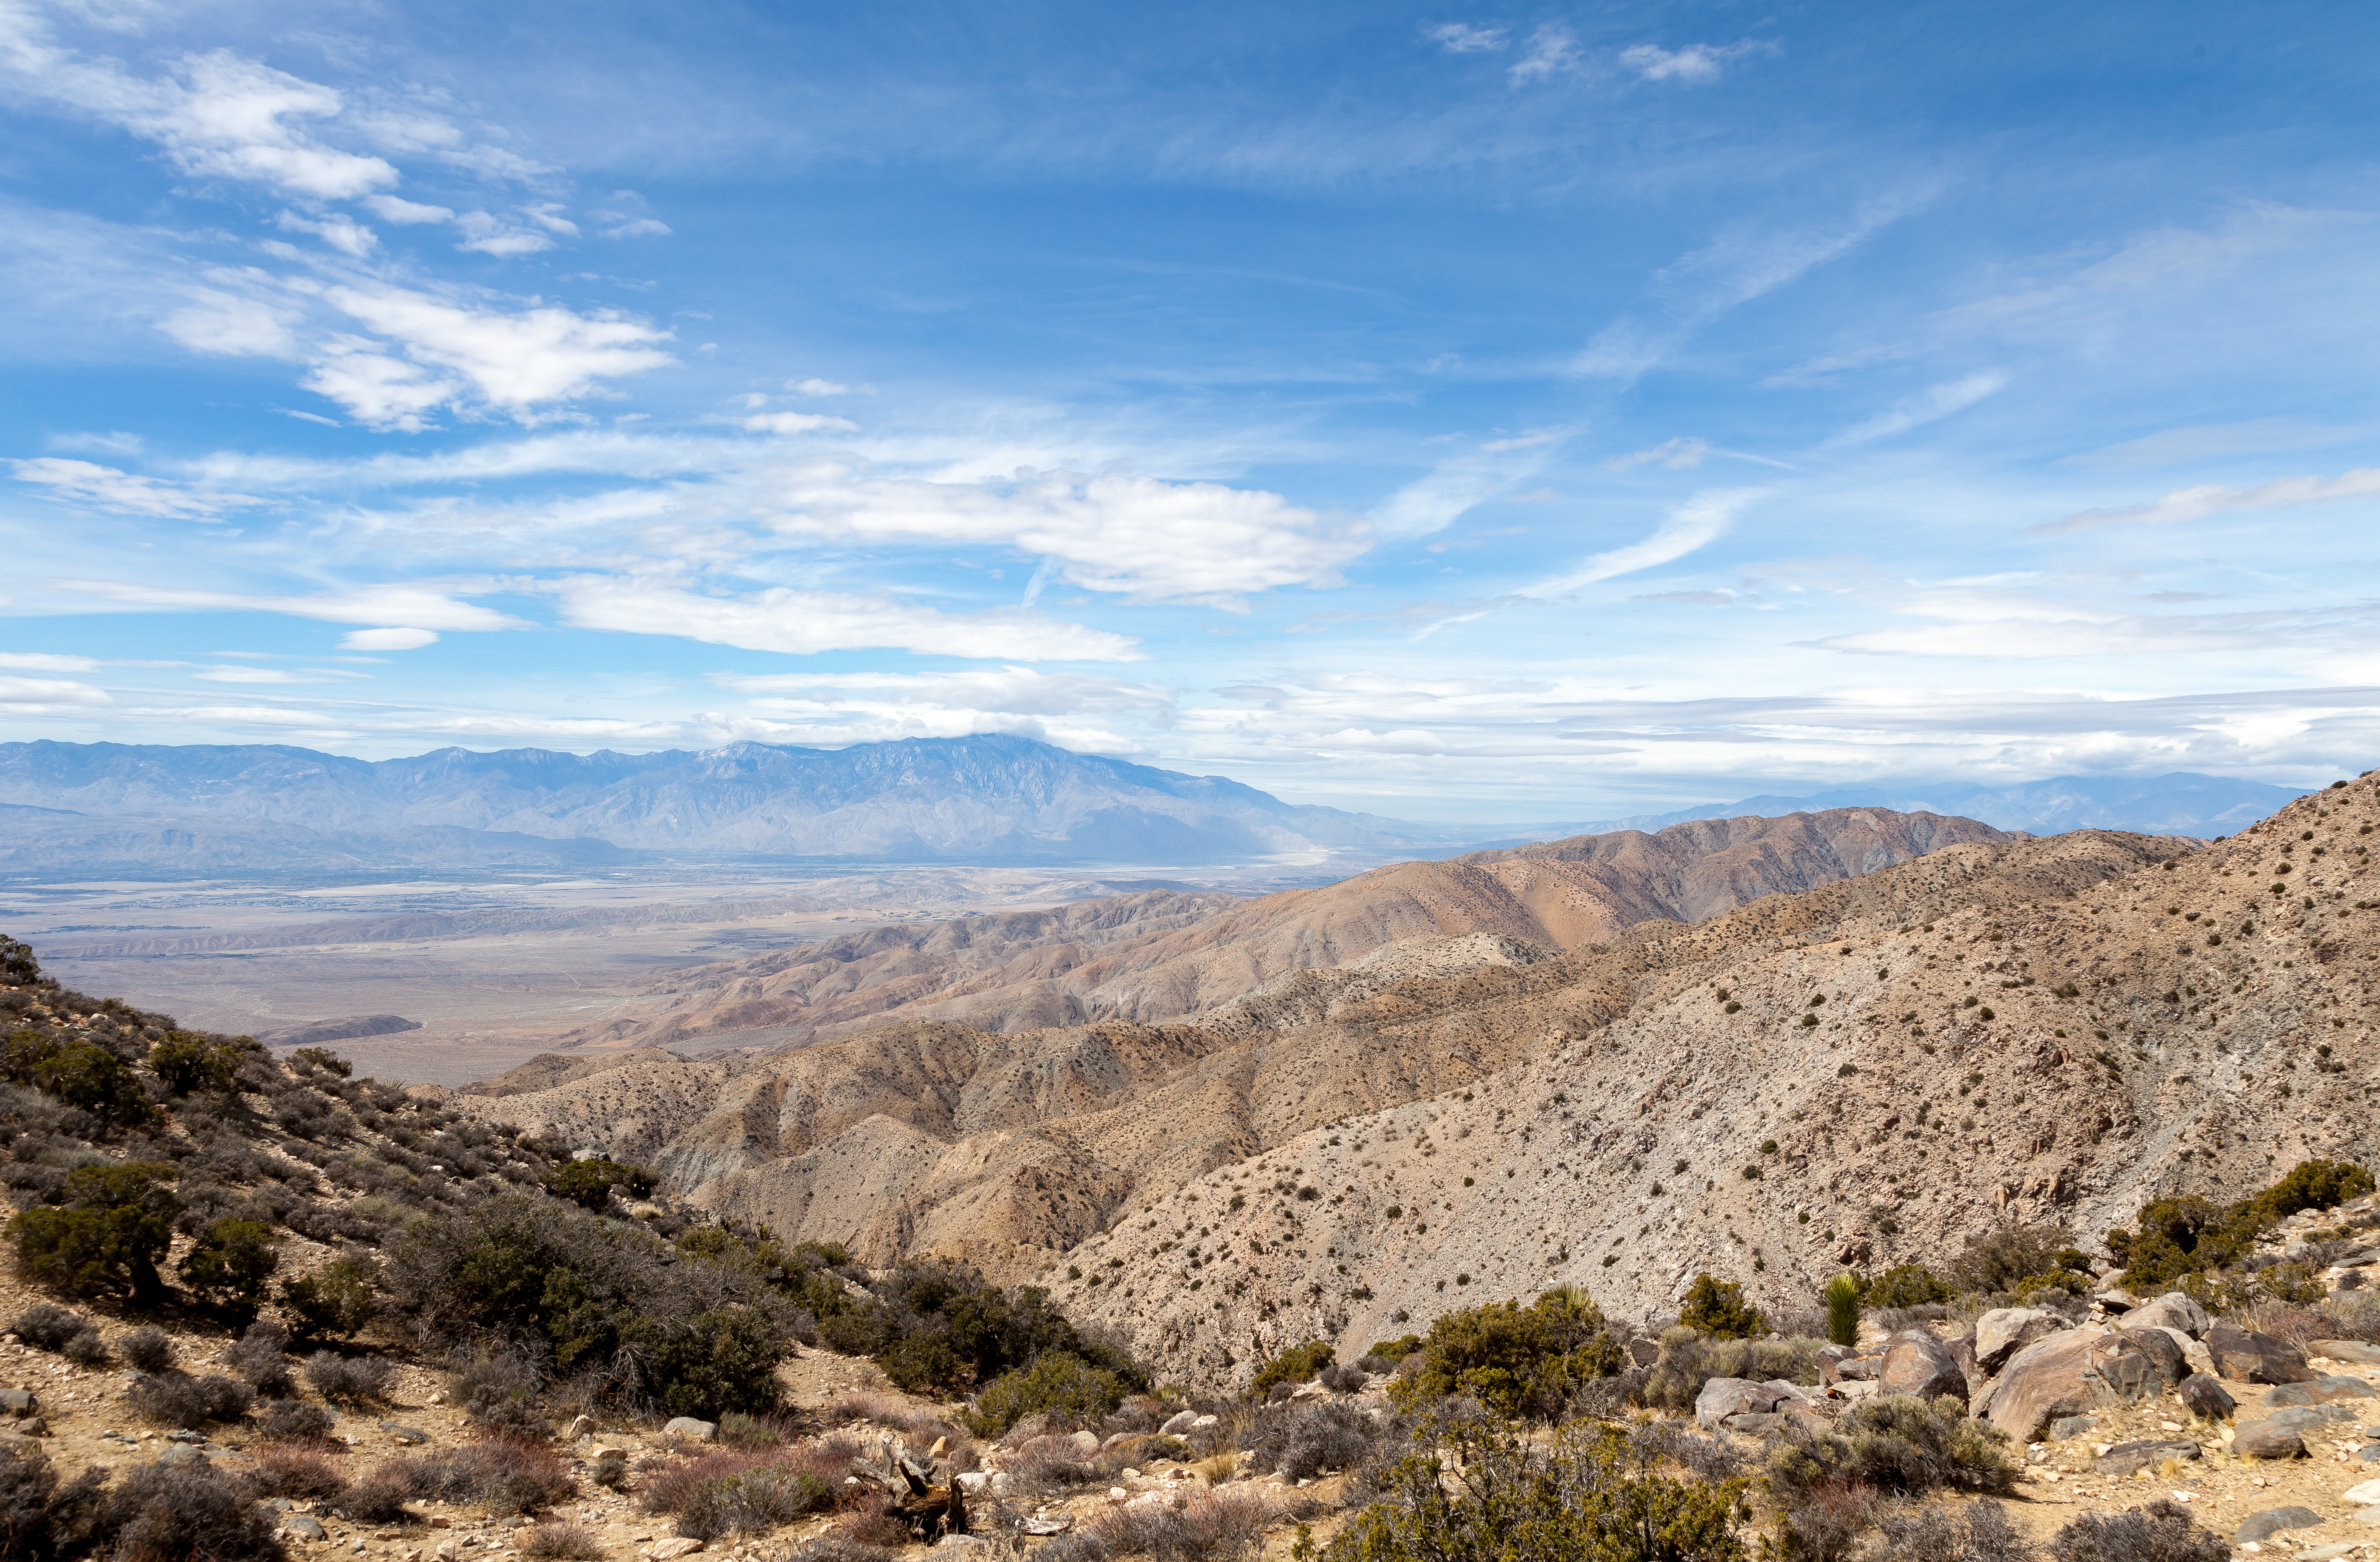 a view from a vista in Joshua Tree National Park